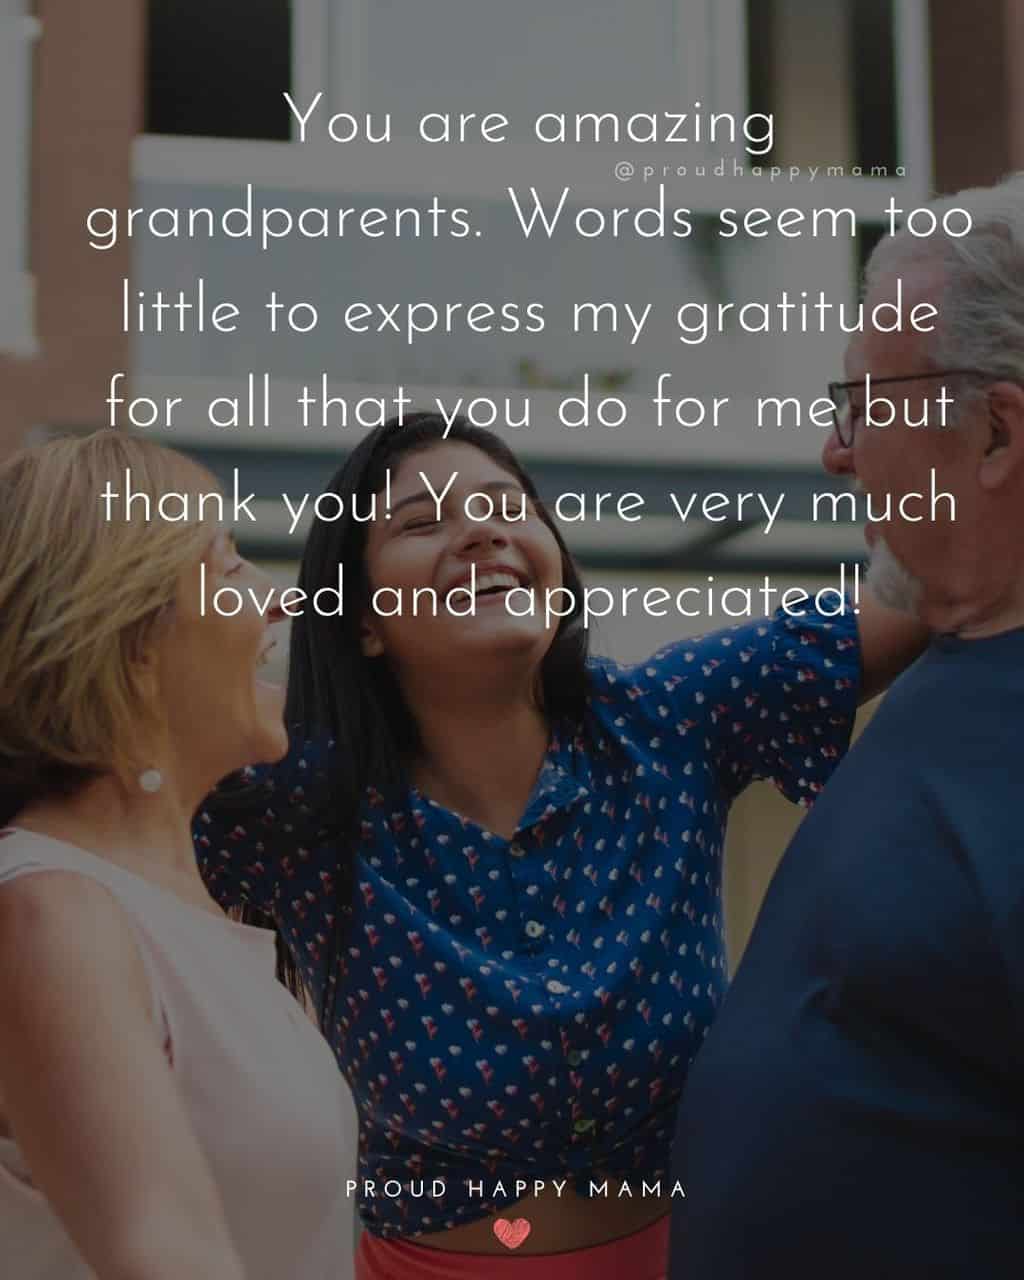 Grandparent Quotes – You are amazing grandparents. Words seem too little to express my gratitude for all that you do for me